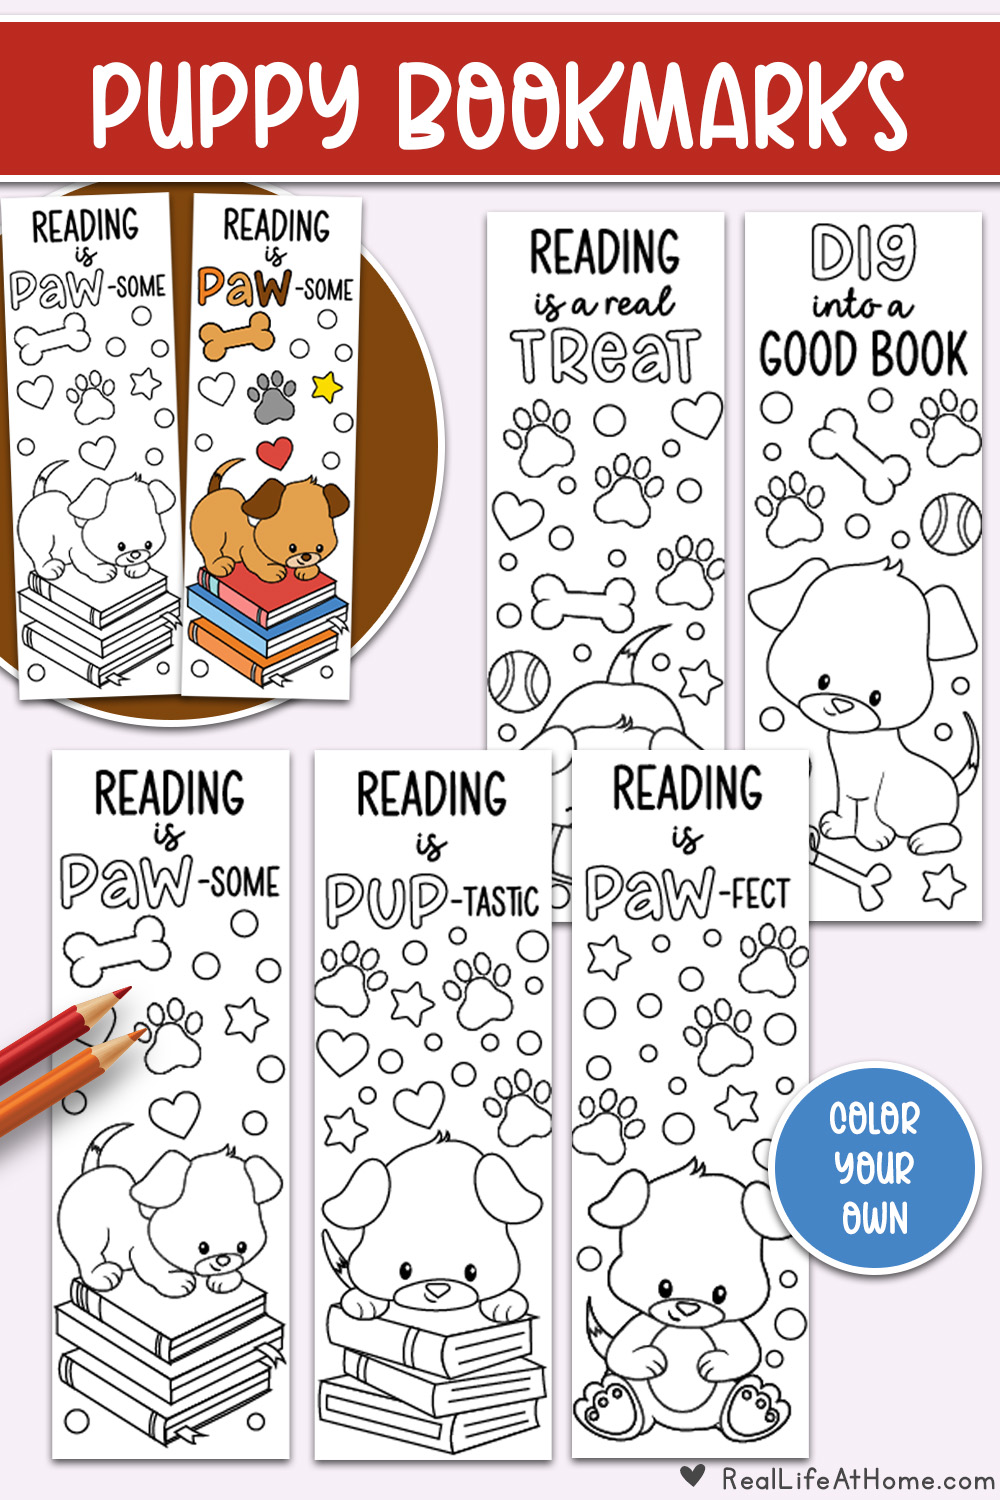 Dog Bookmarks to Color Shown on a Neutral Background.